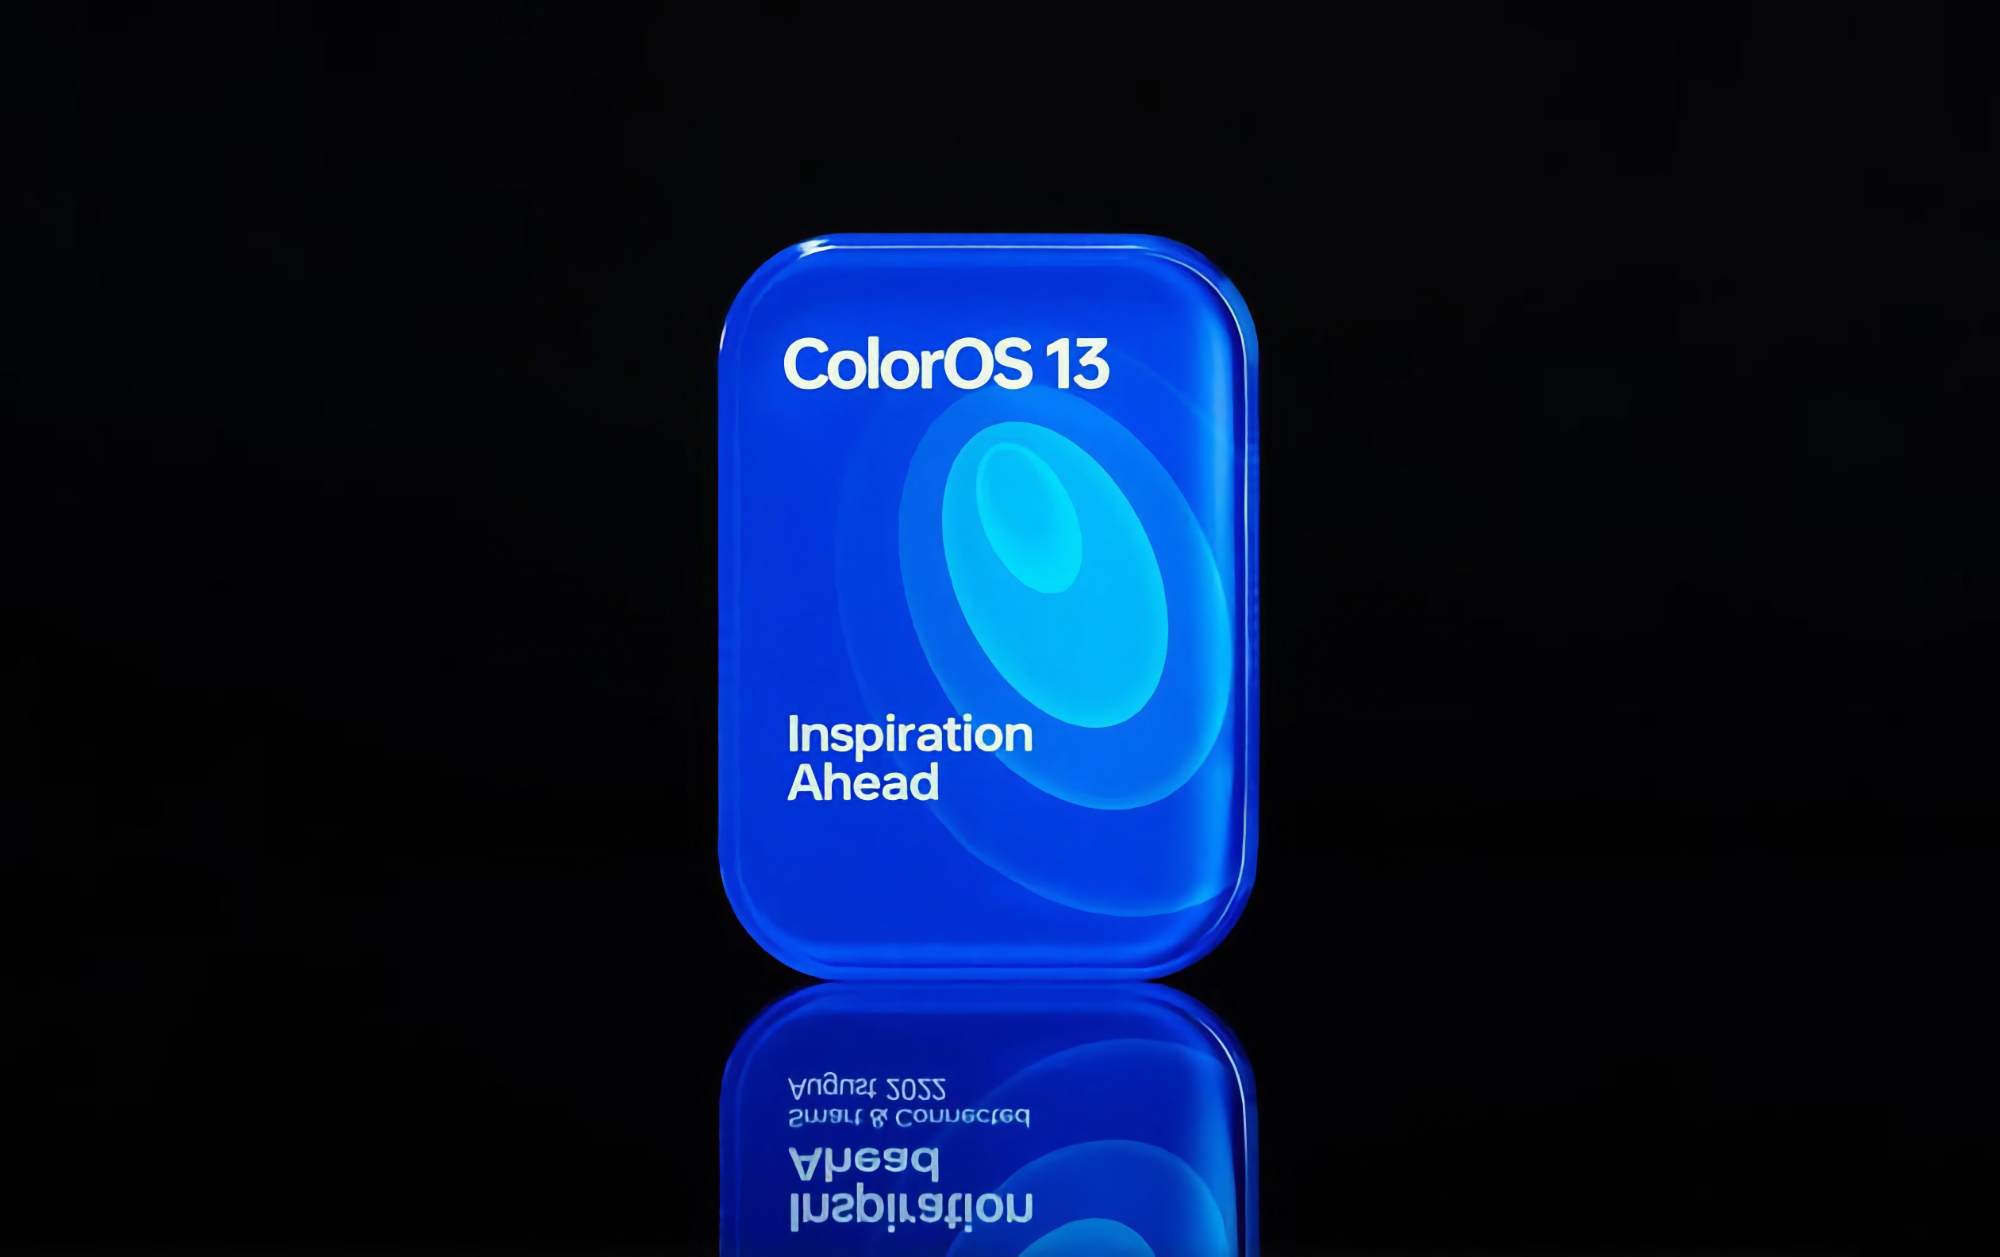 OPPO revealed the company's kickass smartphones will receive ColorOS 13 based on Android 13 in December